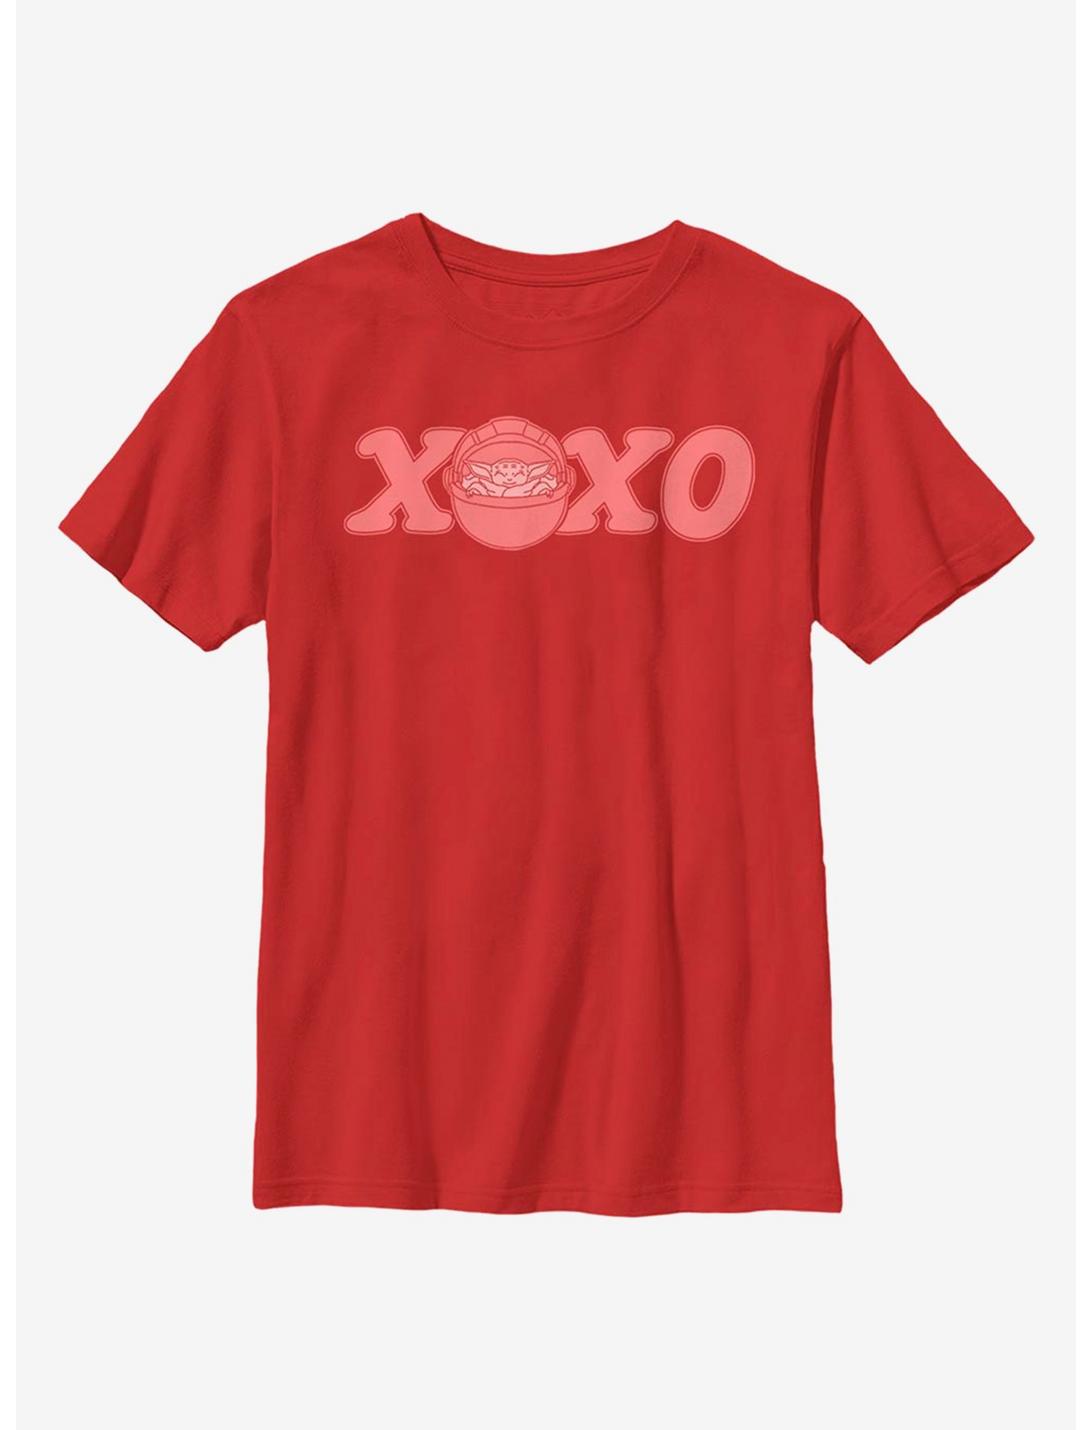 Star Wars The Mandalorian XOXO The Child Youth T-Shirt, RED, hi-res